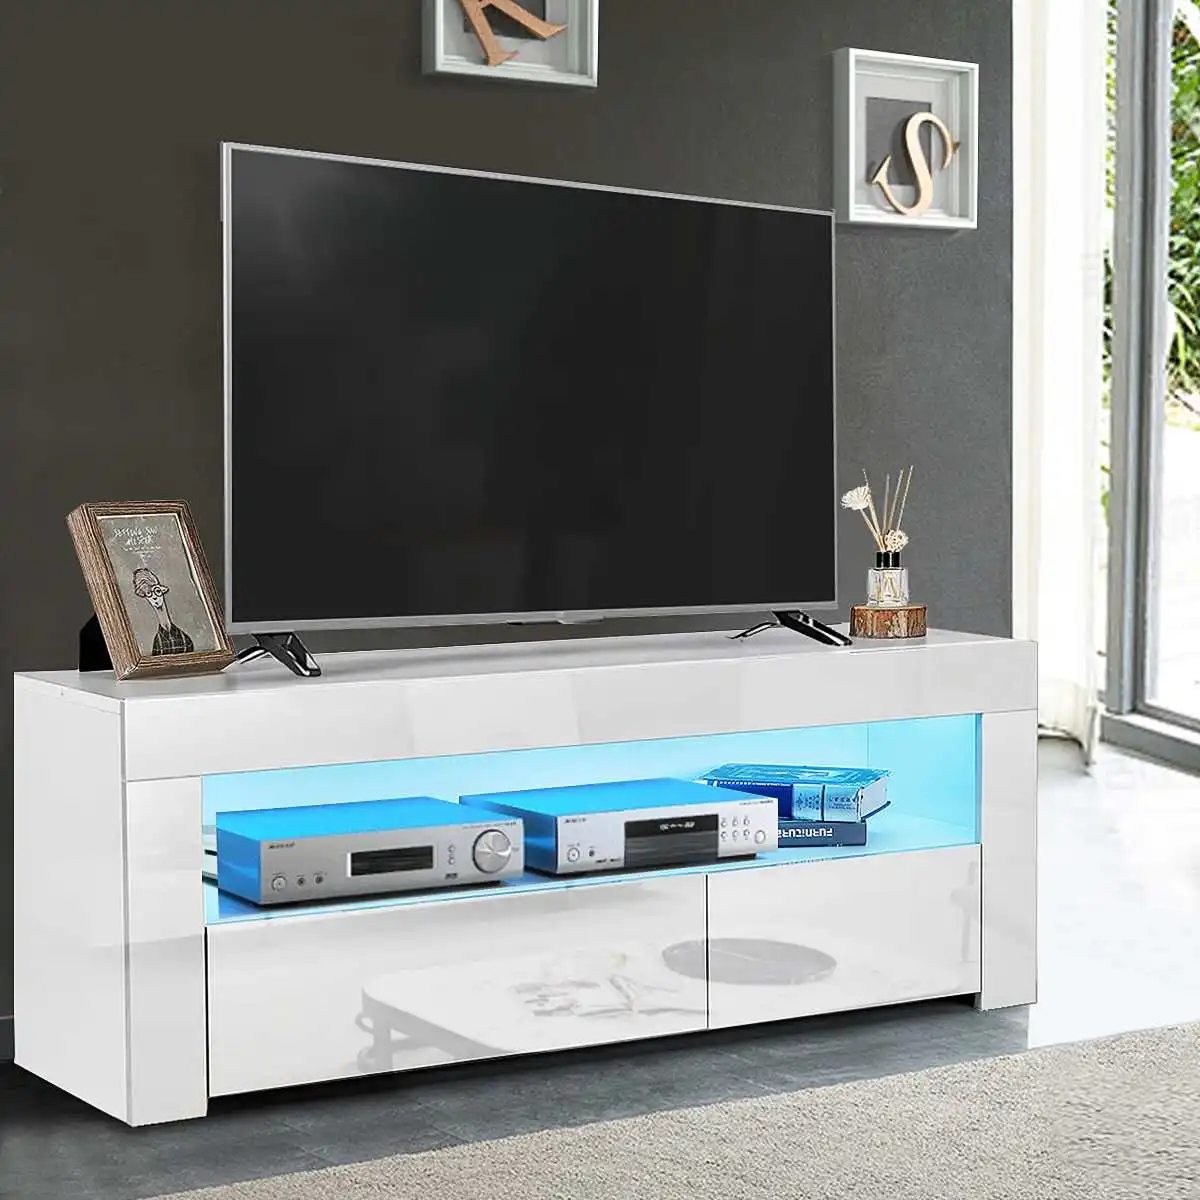 S With Drawer Cabinet Storage Organizer Tv Unit Bracket Living Room Furniture Tv Monitor Stand